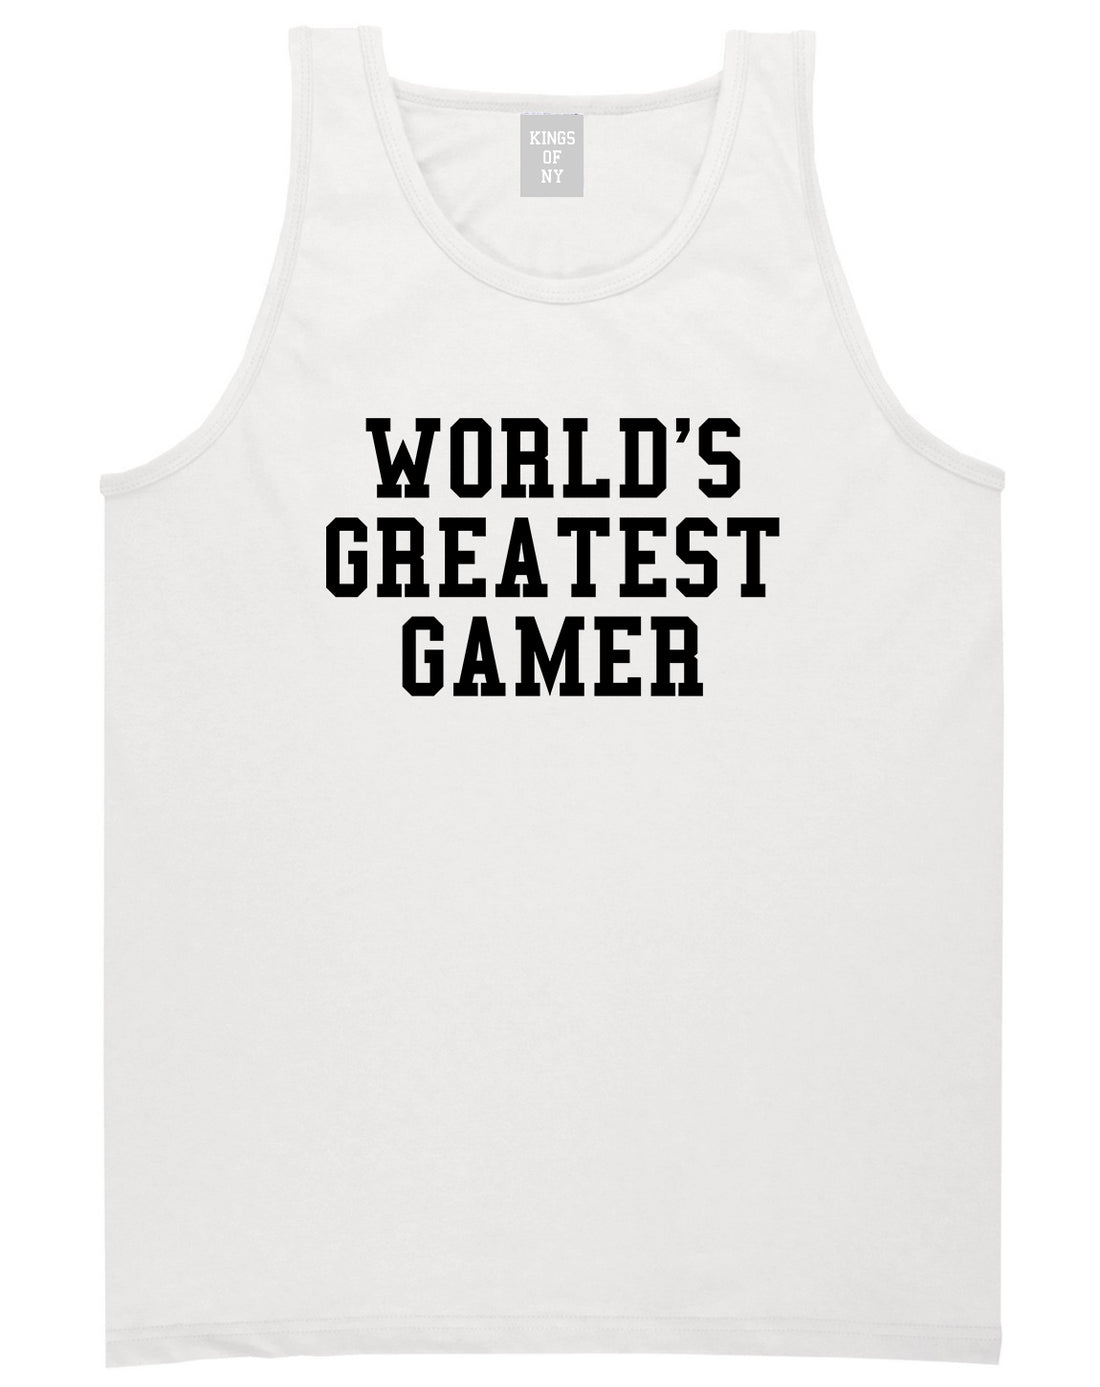 Worlds Greatest Gamer Funny Gaming Mens Tank Top T-Shirt White